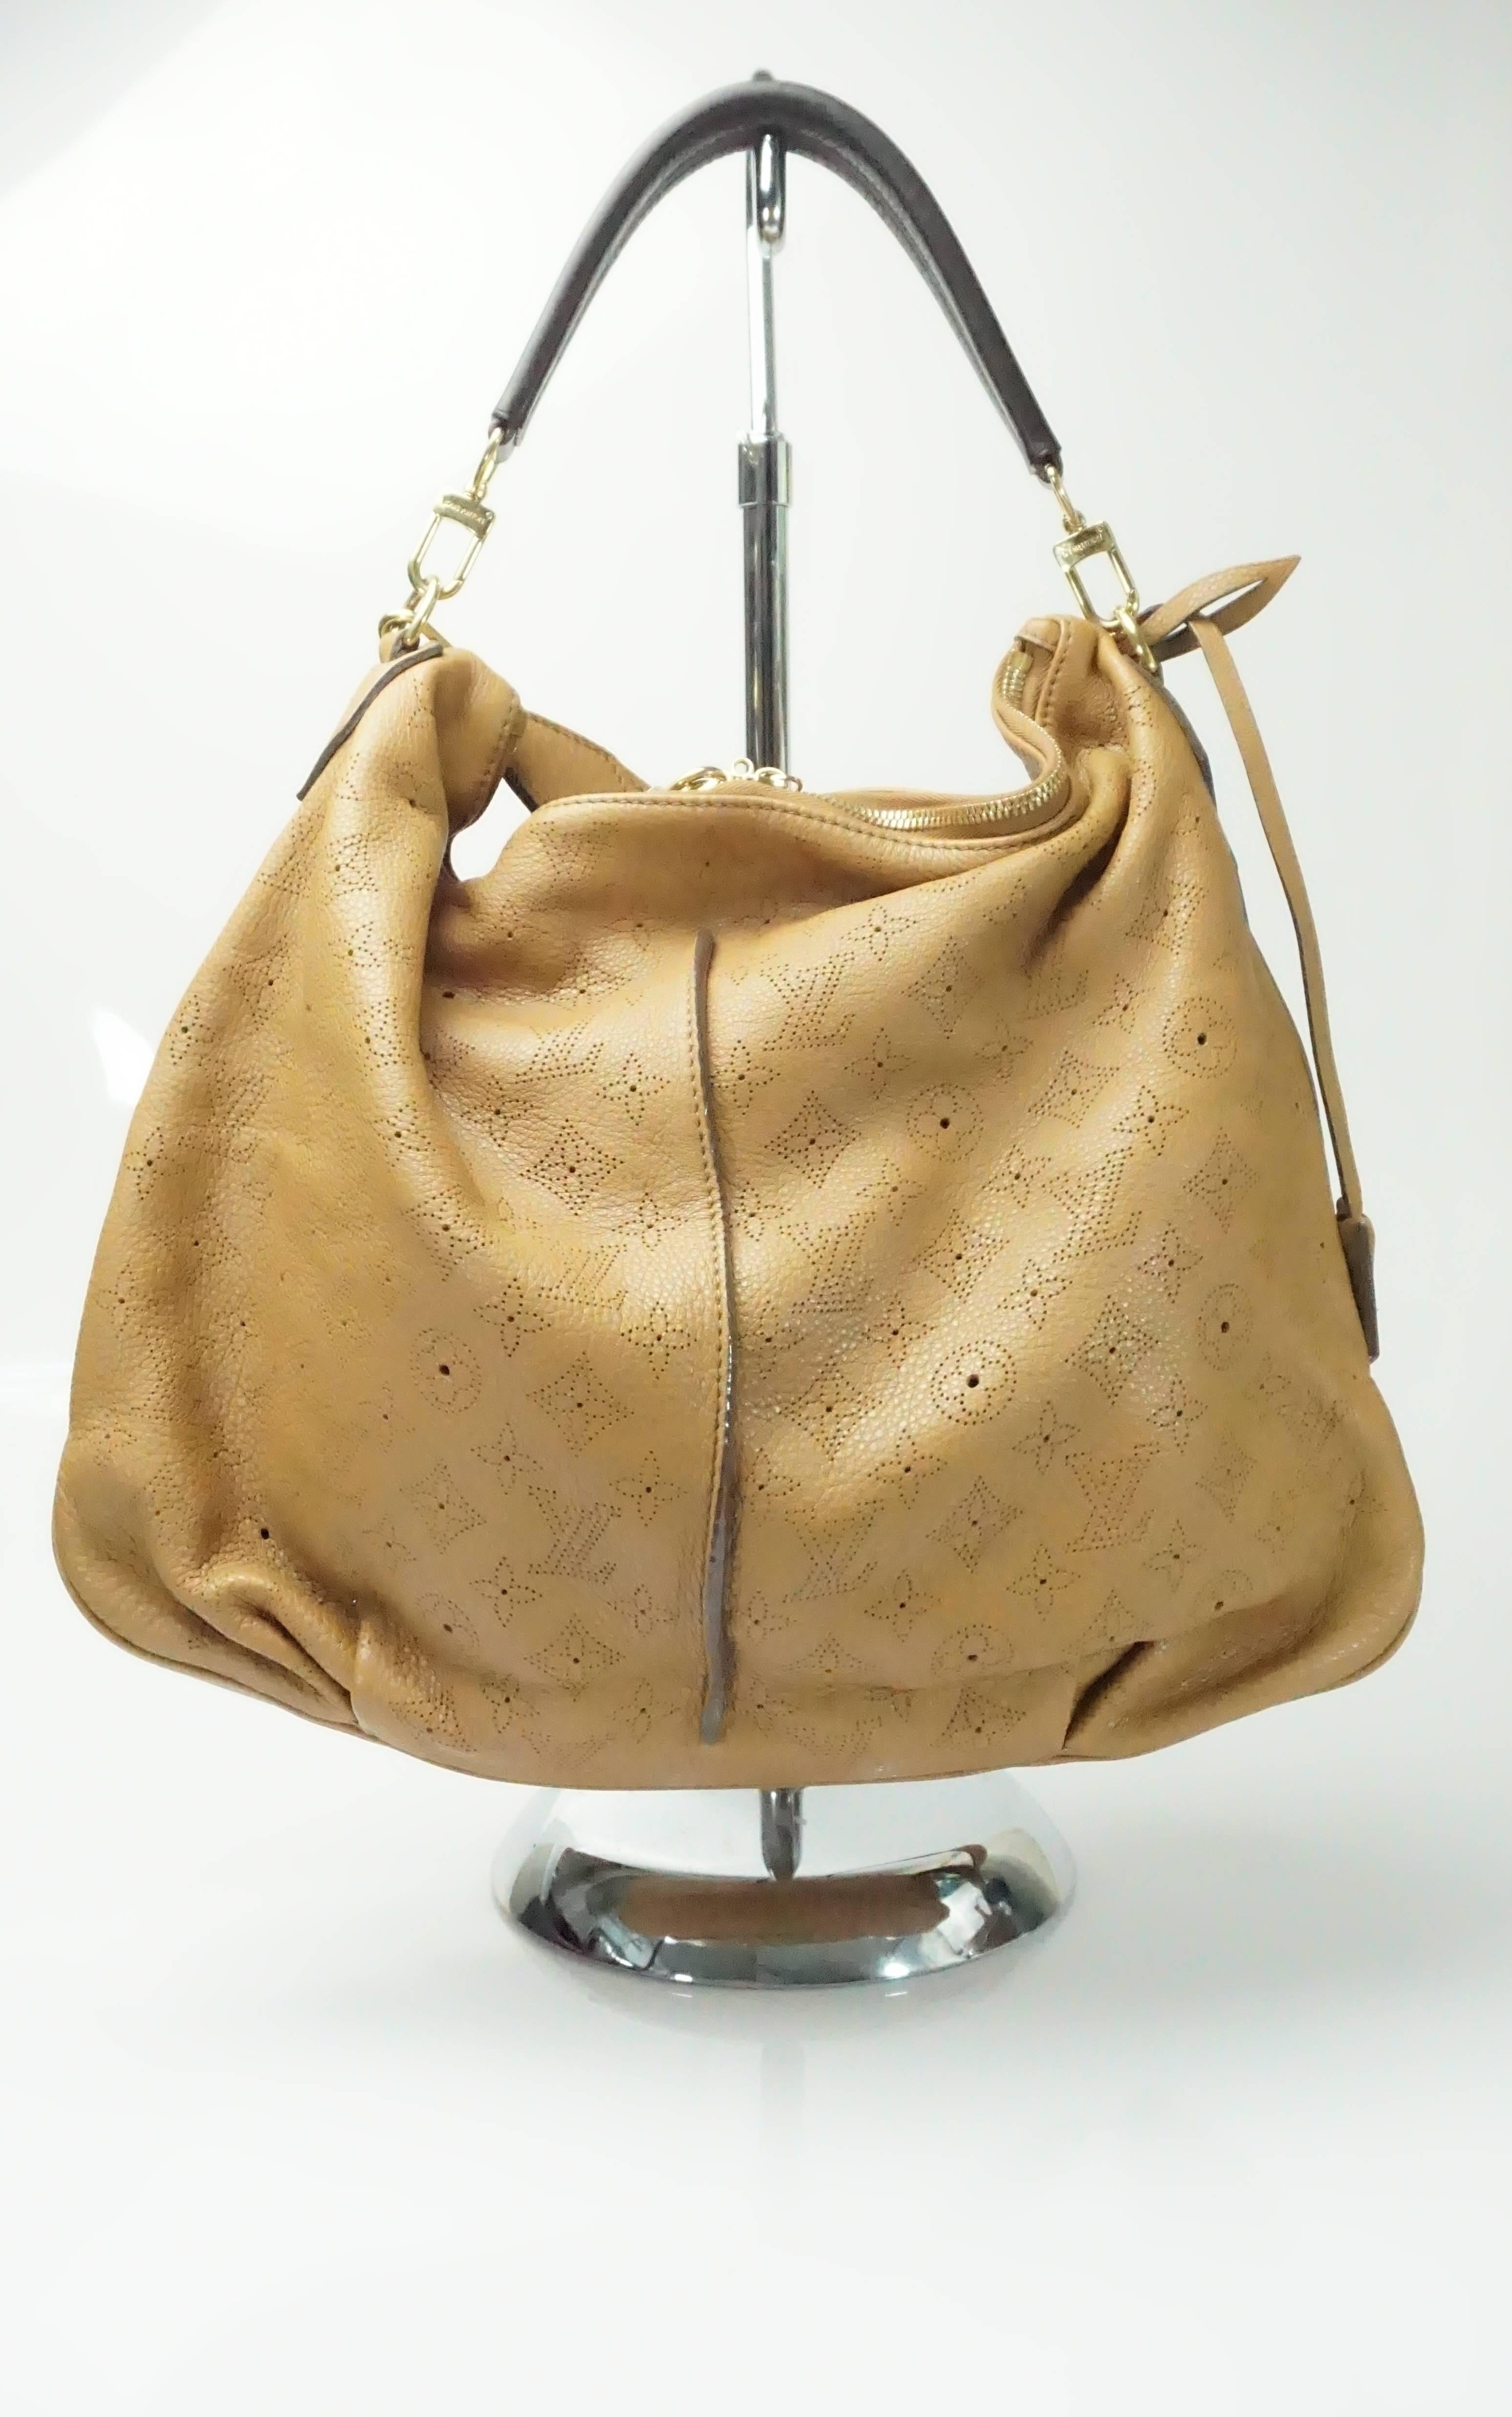 Luis Vuitton Luggage Selena Mahina PM Handbag - GHW - 2012  This leather Louis Vuitton Selene PM bag has brass hardware and chocolate brown leather trim. There is a detachable flat shoulder strap and a adjustable cross body strap. The inside is